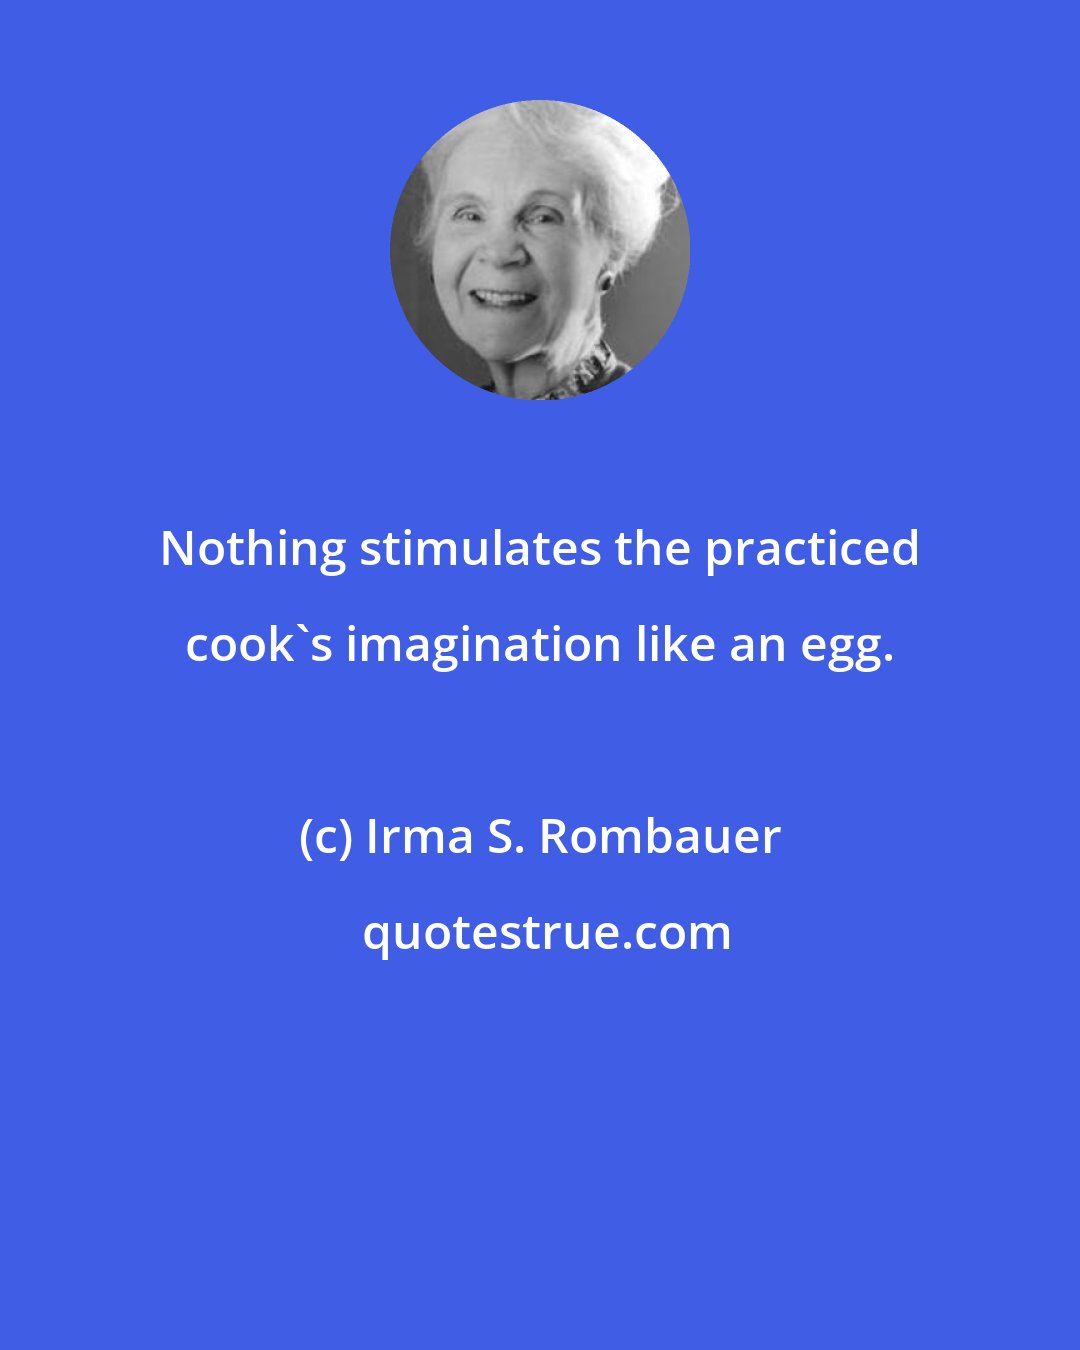 Irma S. Rombauer: Nothing stimulates the practiced cook's imagination like an egg.